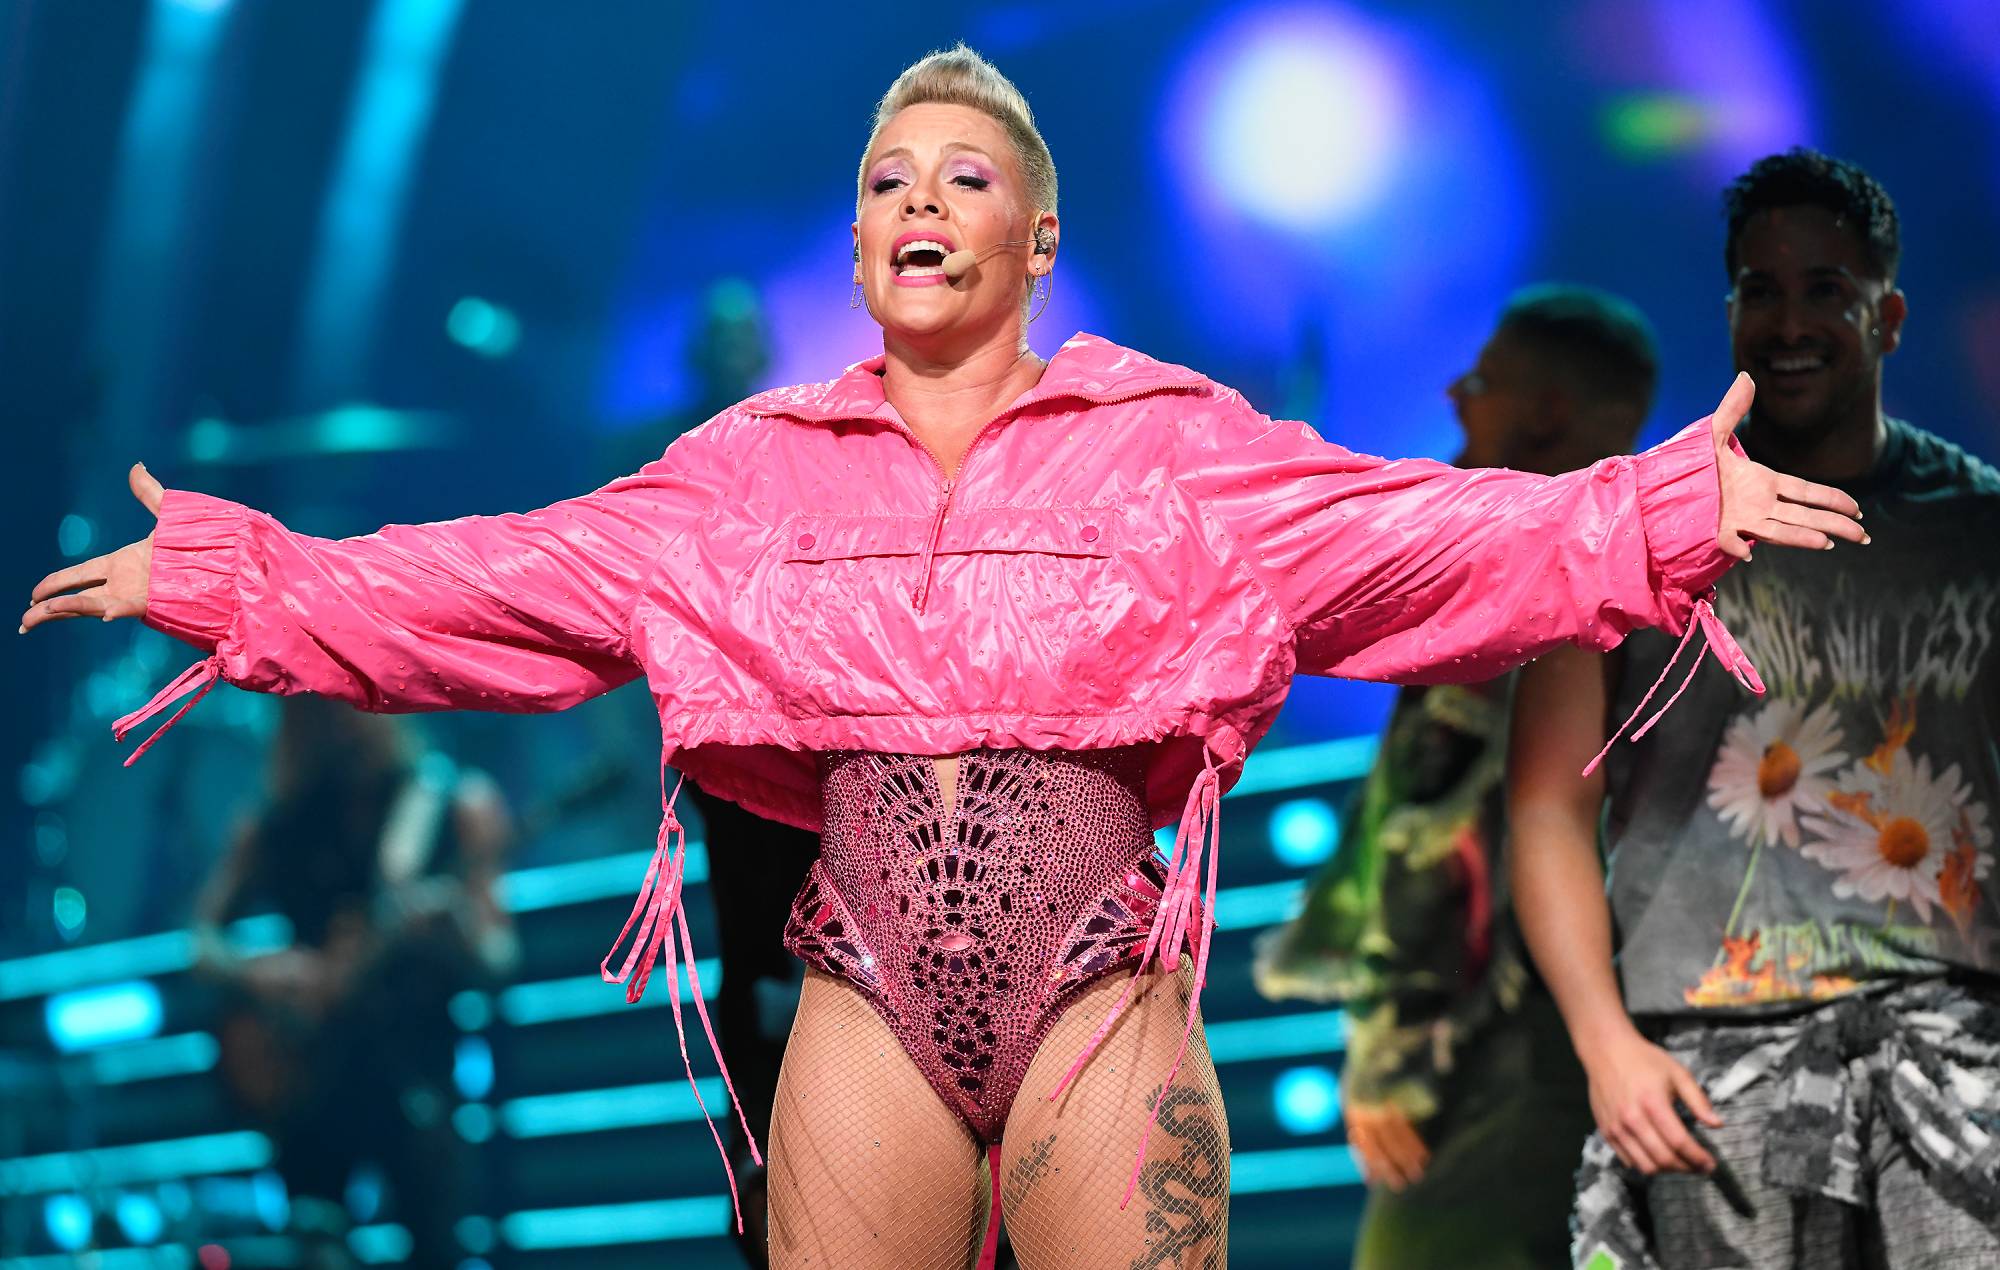 P!nk to give away banned books at Florida shows